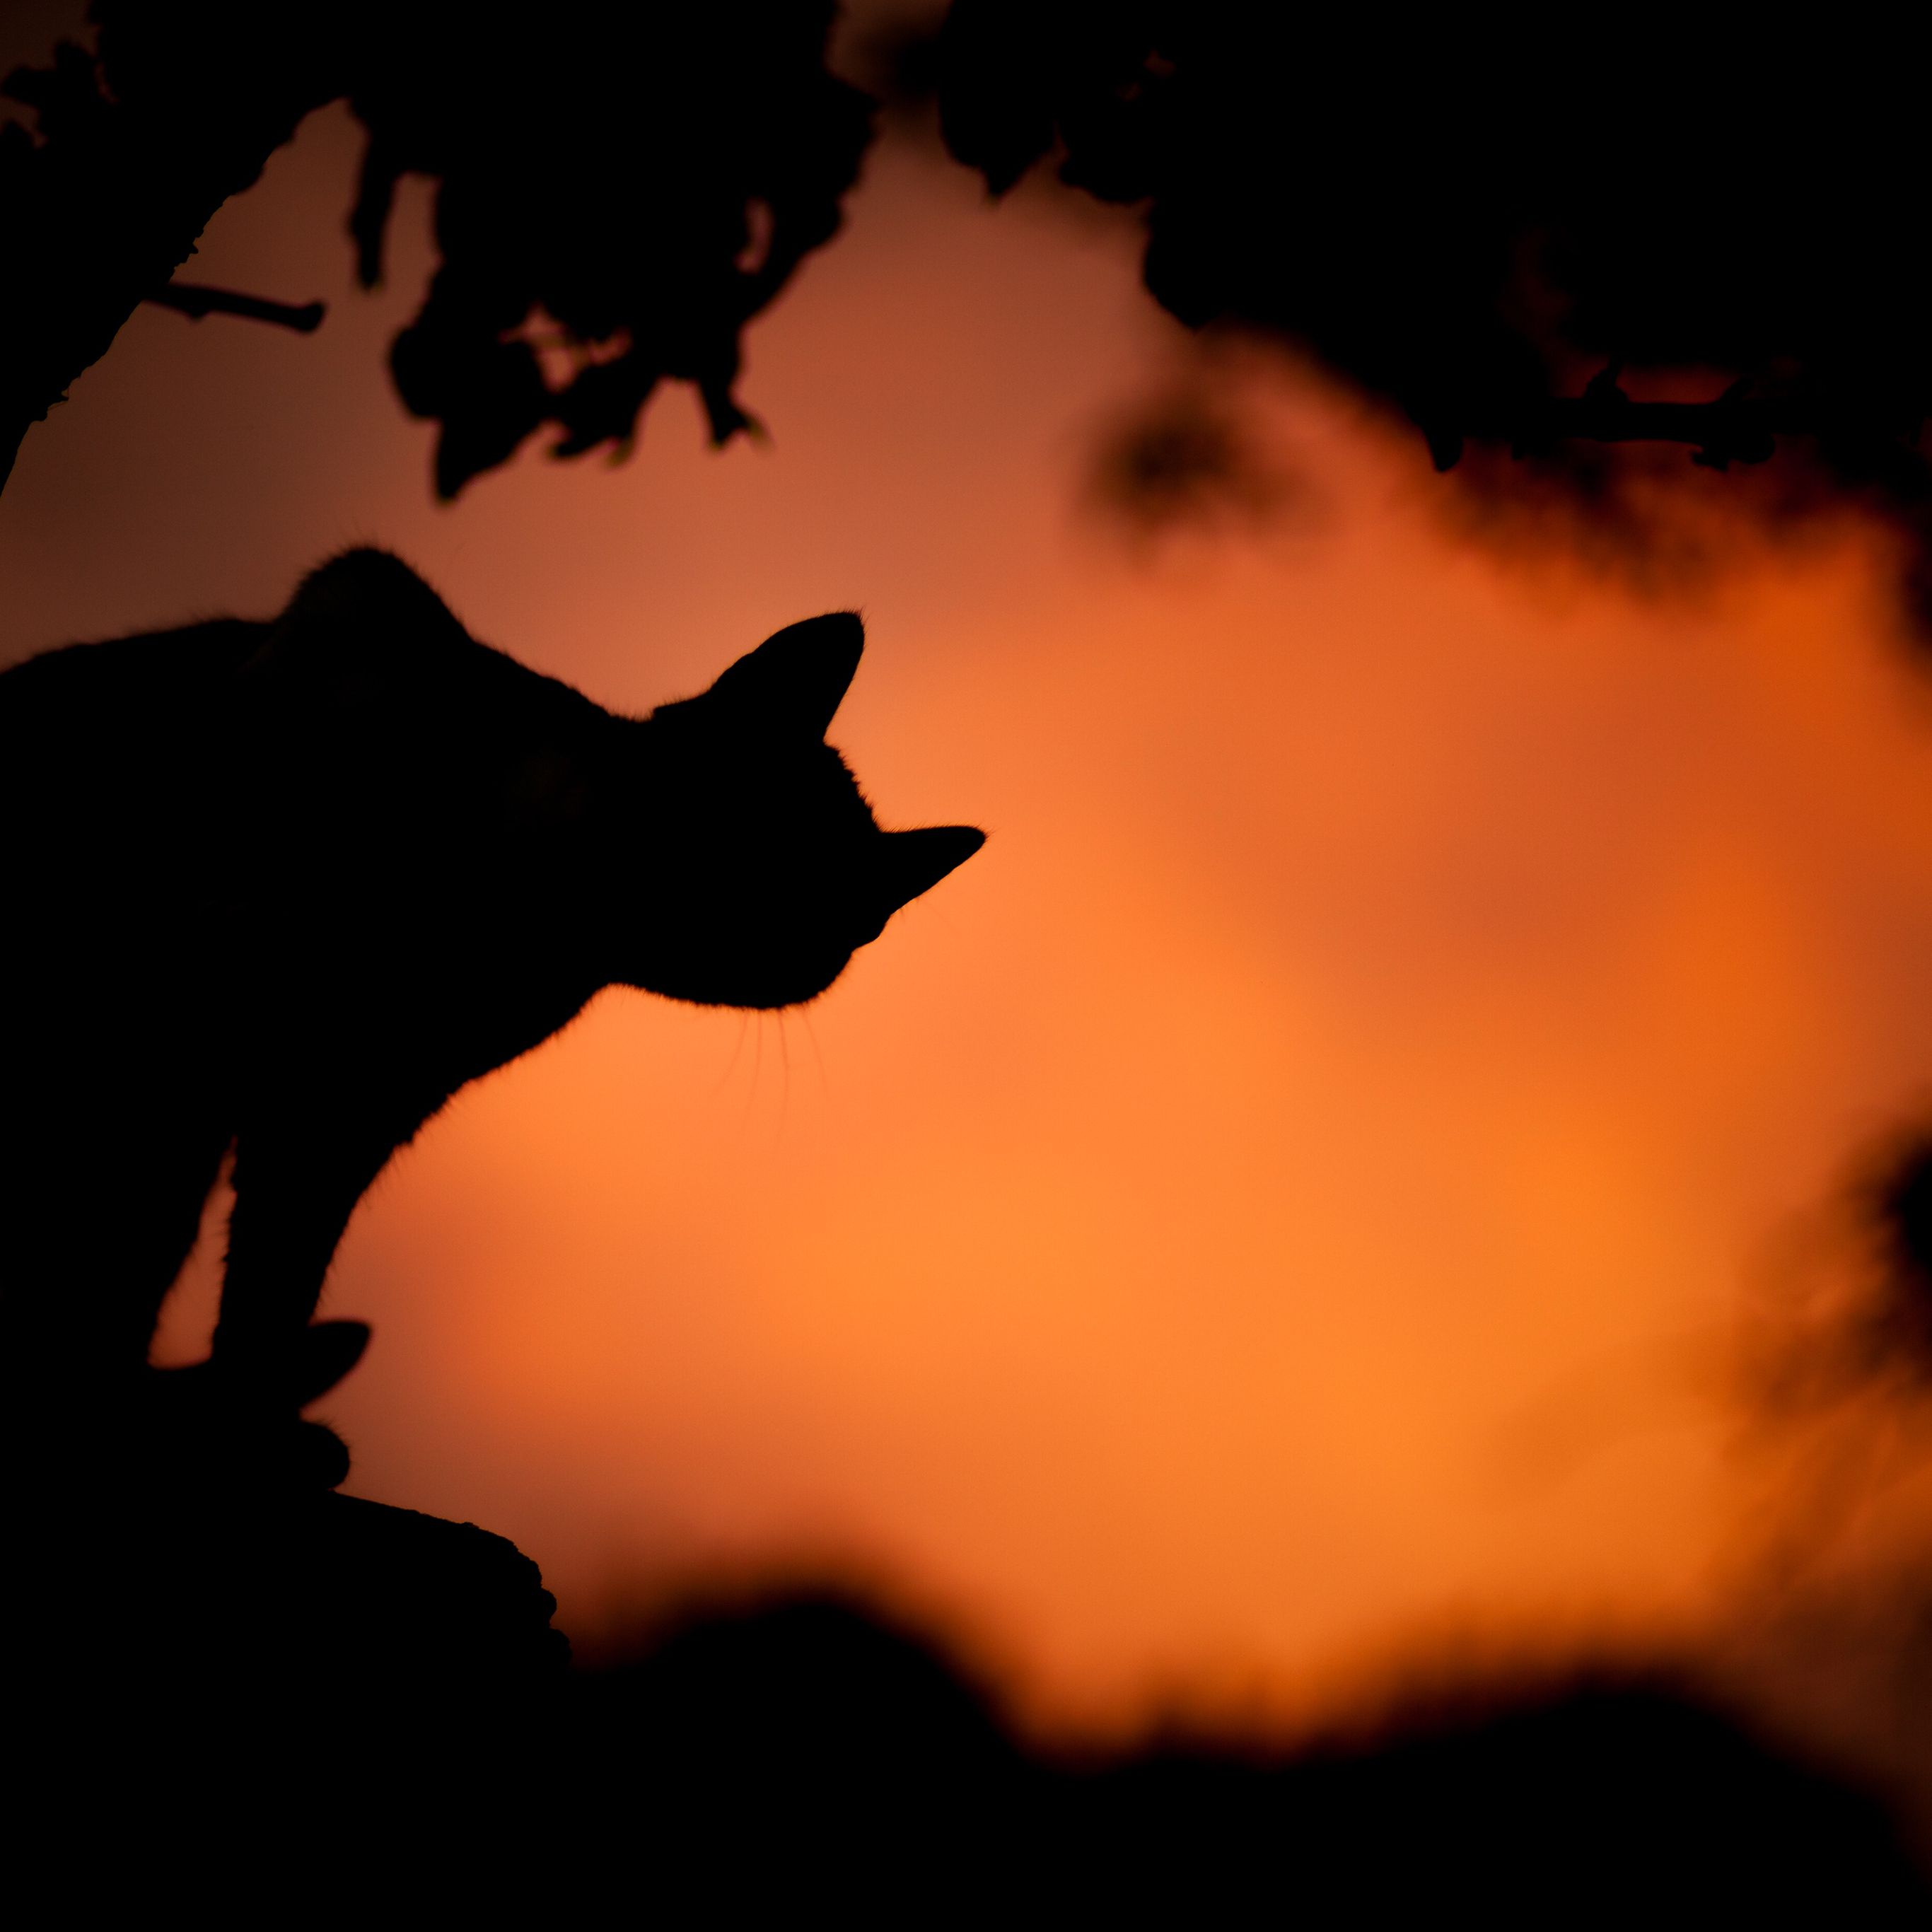 A silhouette of a cat on a tree branch with a red sky in the background - Dark orange, Halloween, spooky